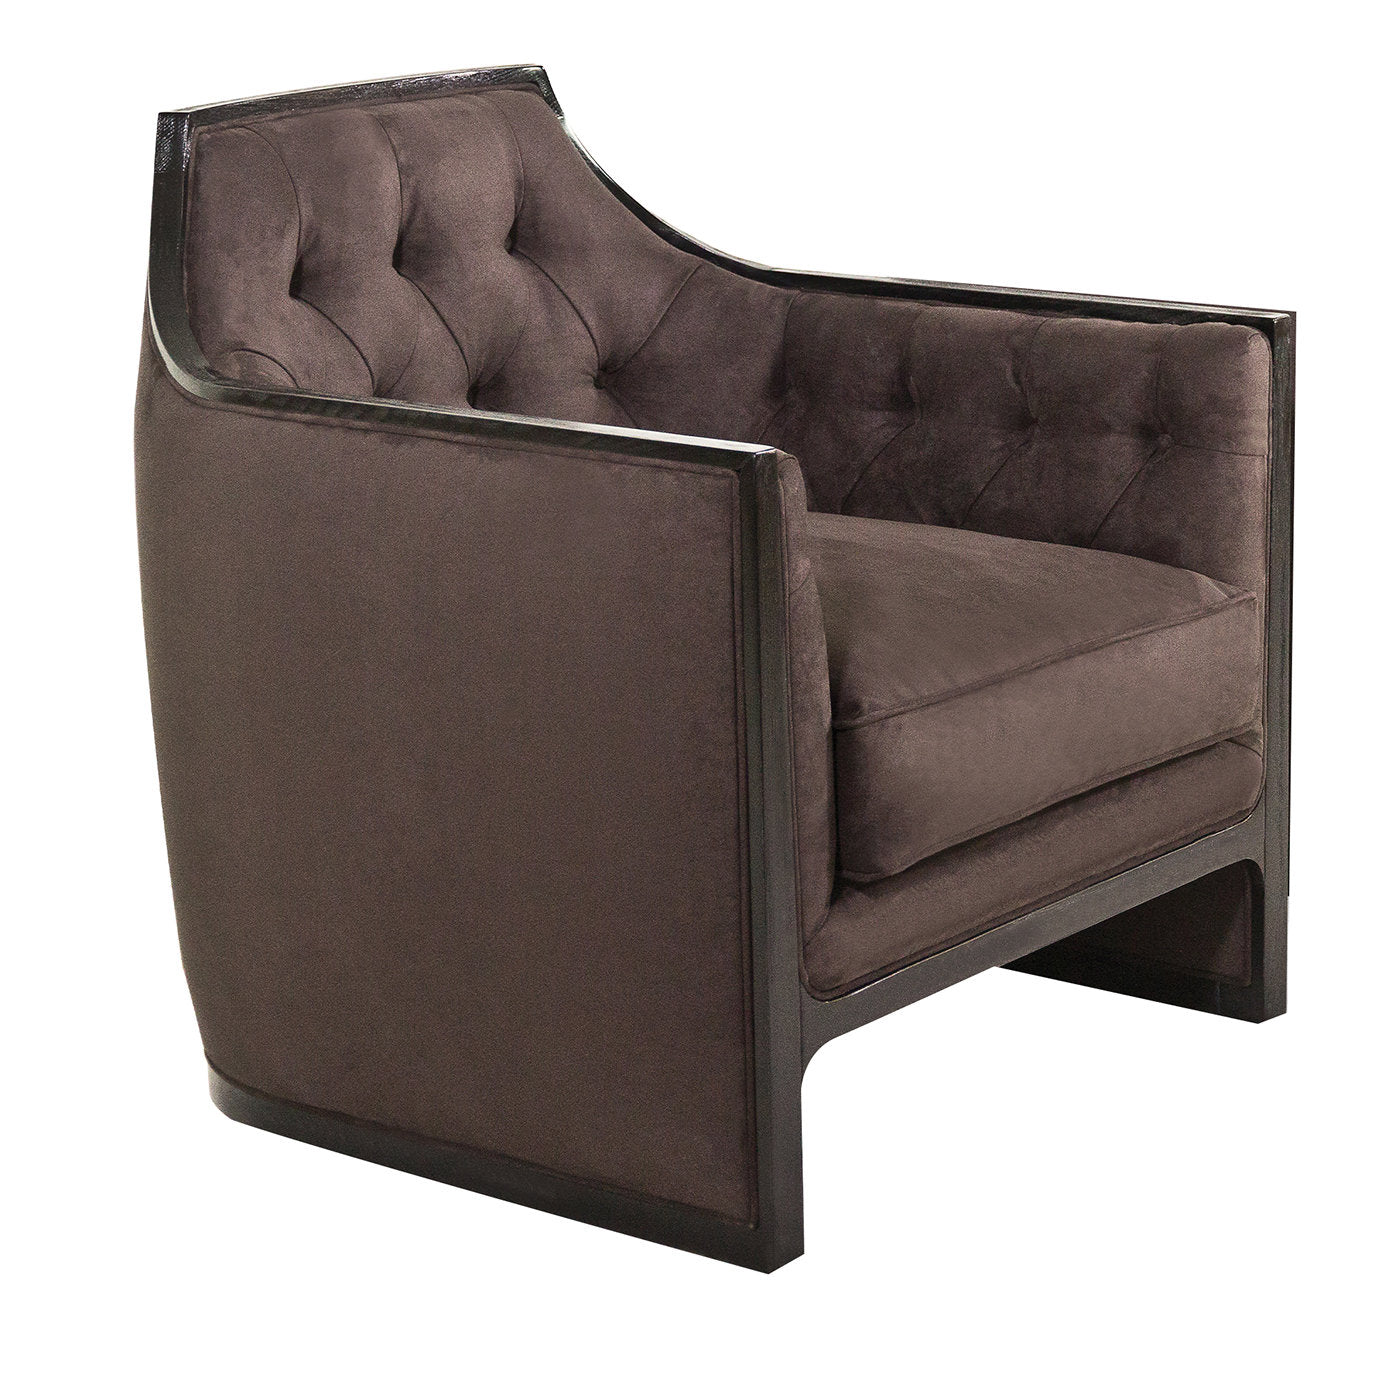 Compact Tufted Tobacco Sessel - Hauptansicht